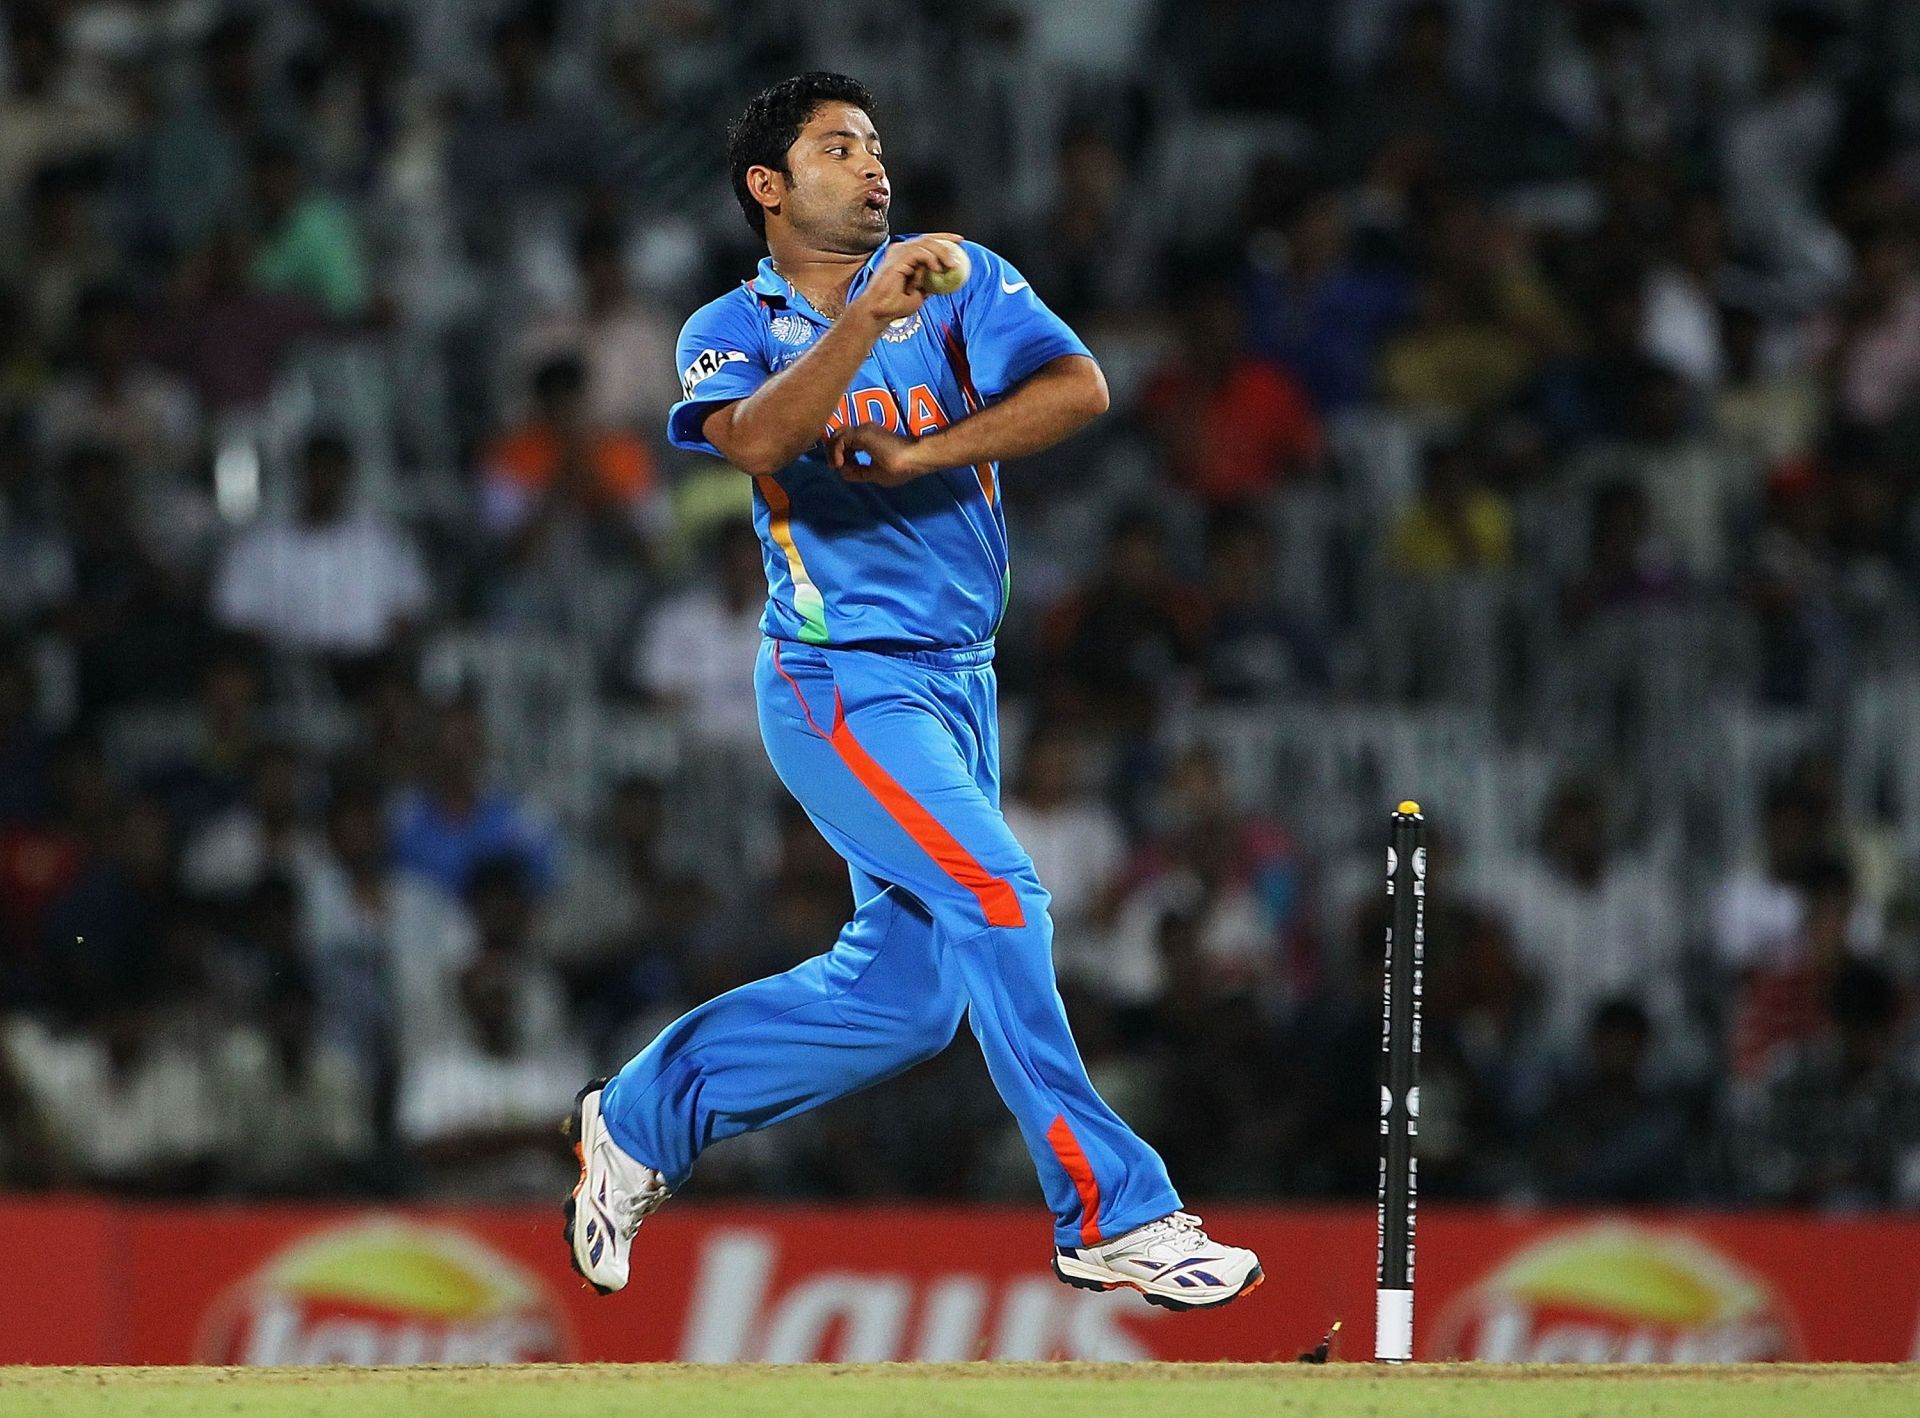 Piyush Chawla is an experienced player who might be playing in his final IPL season